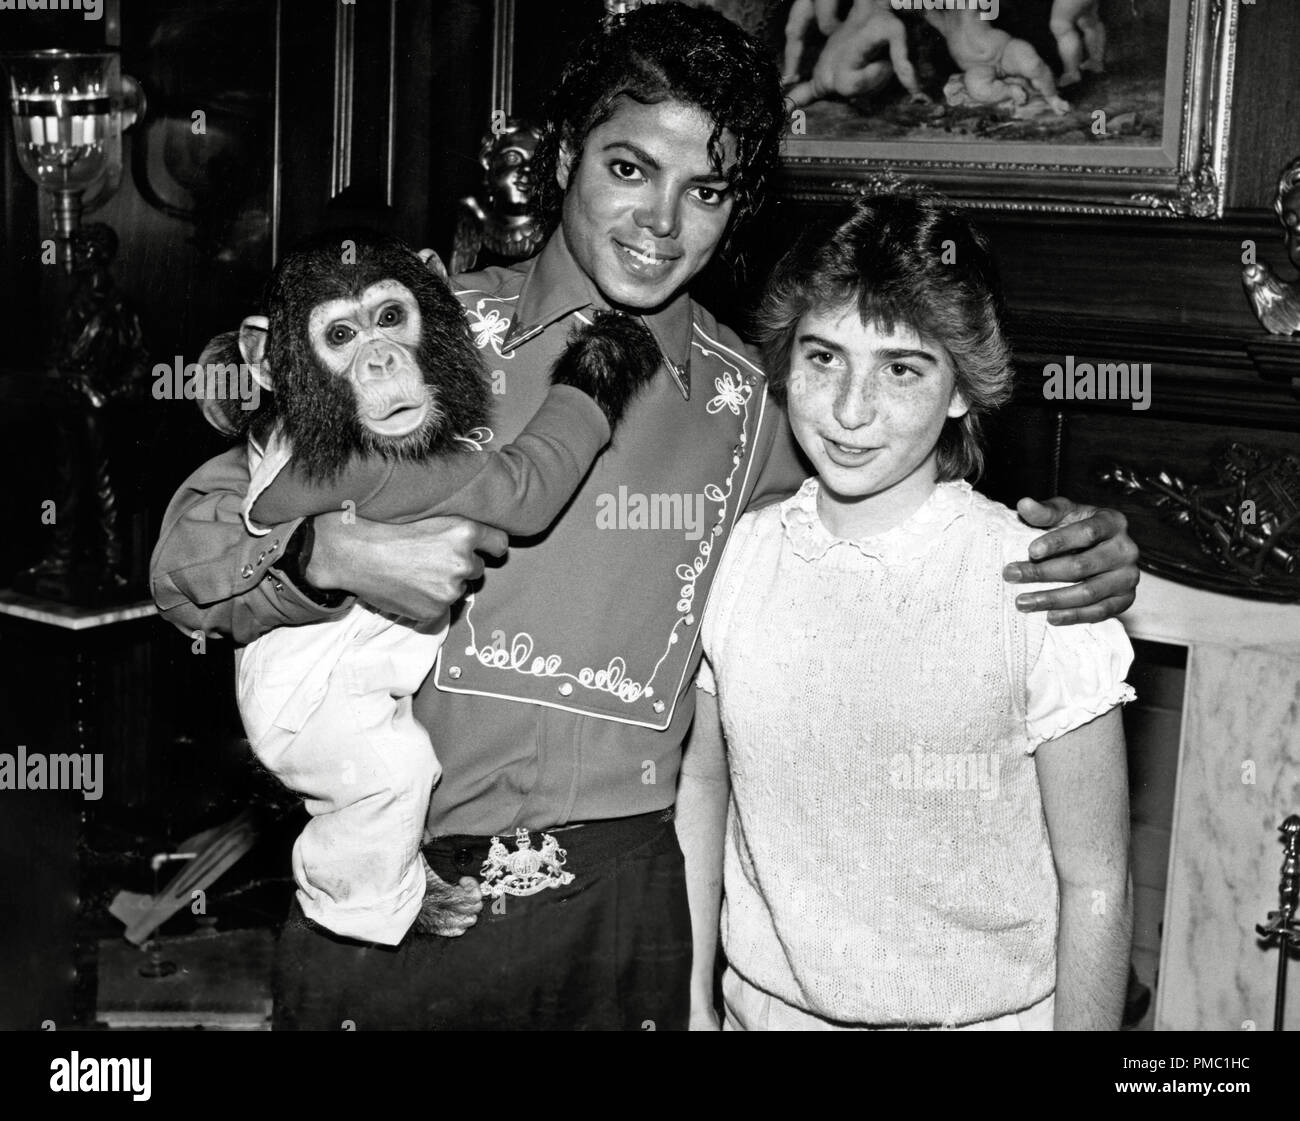 Michael Jackson,  poses with 14-year-old fan and his pet chimpanzee Bubbles at the Neverland Ranch circa 1986   File Reference # 33595 499THA Stock Photo